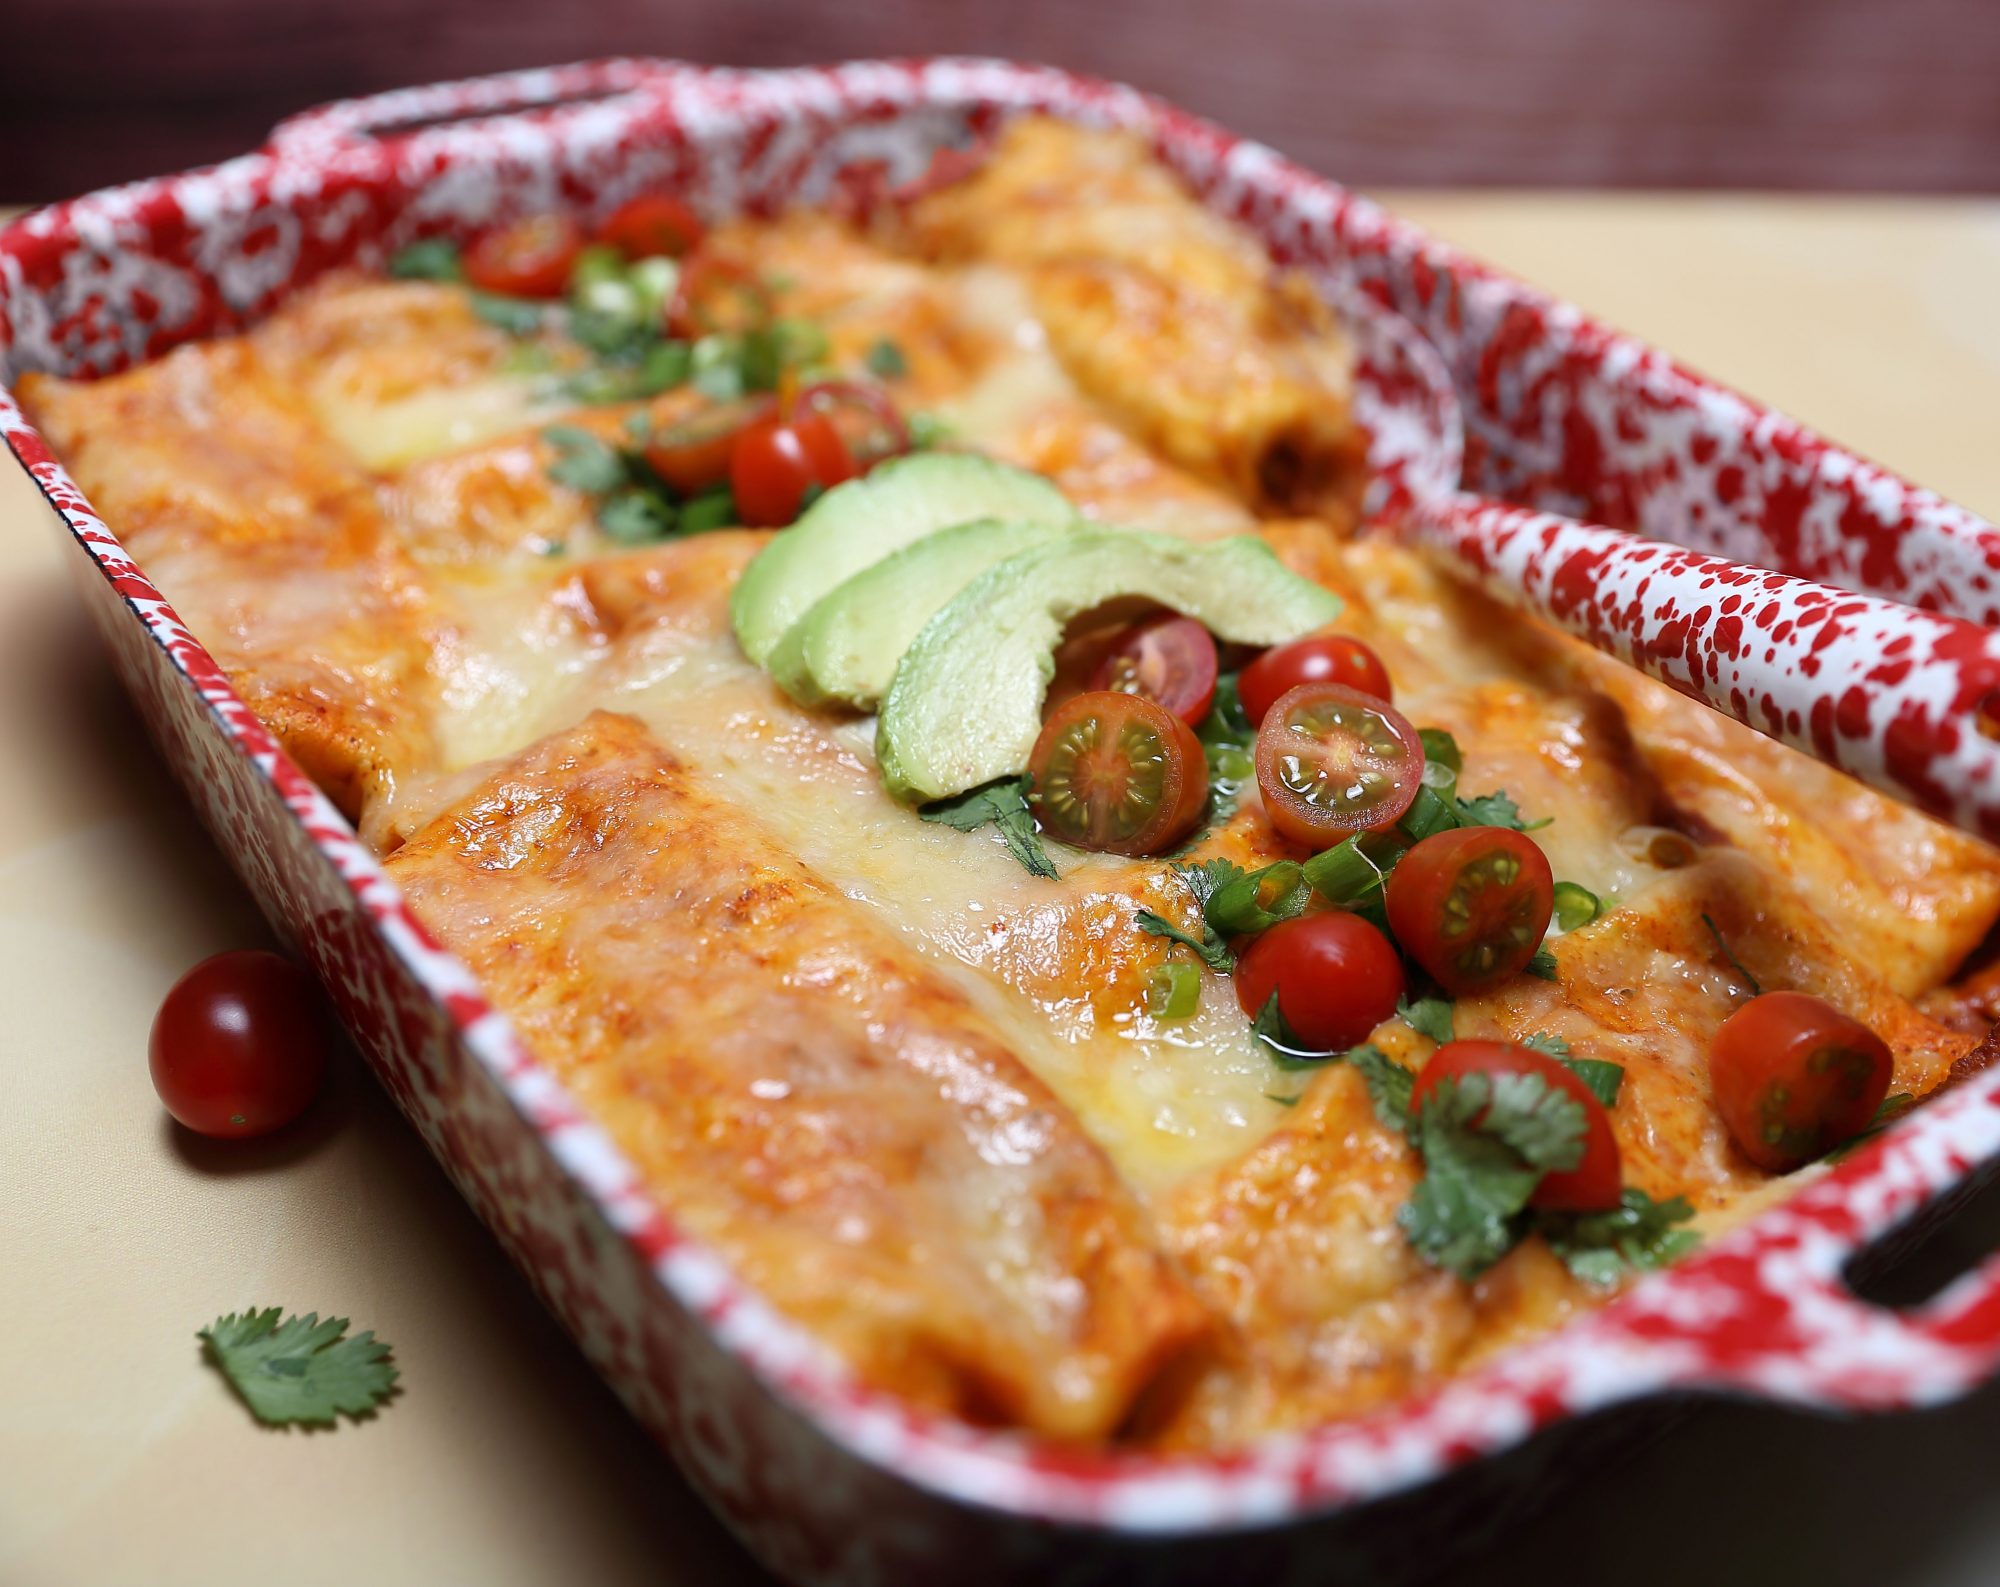 Top view of sausage enchiladas in a red and white pan garnished with avocado and tomato